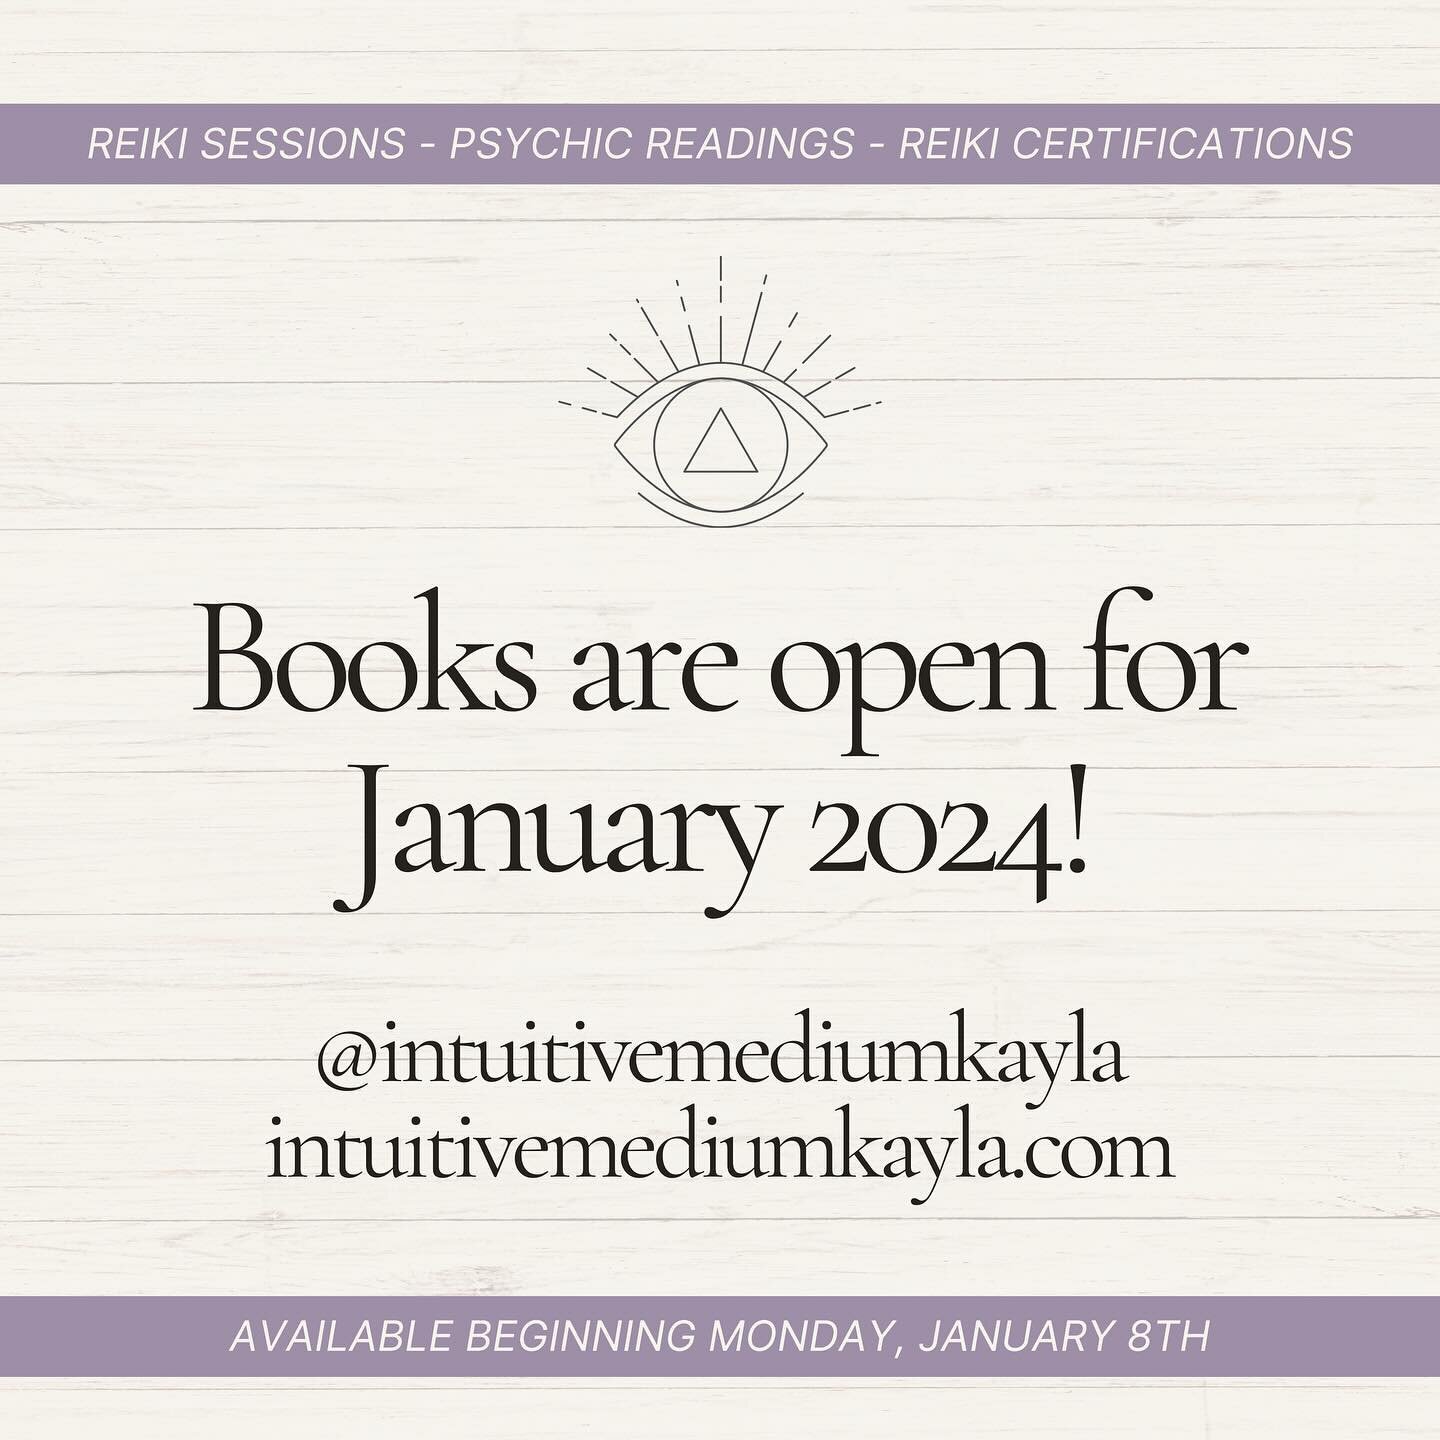 Only 5 spots remaining for the New Year&rsquo;s Flash Reading special &amp; January is already starting to book out! See the second slide for featured services and pricing. For a full list of offerings, please visit my website (link in bio). All in p